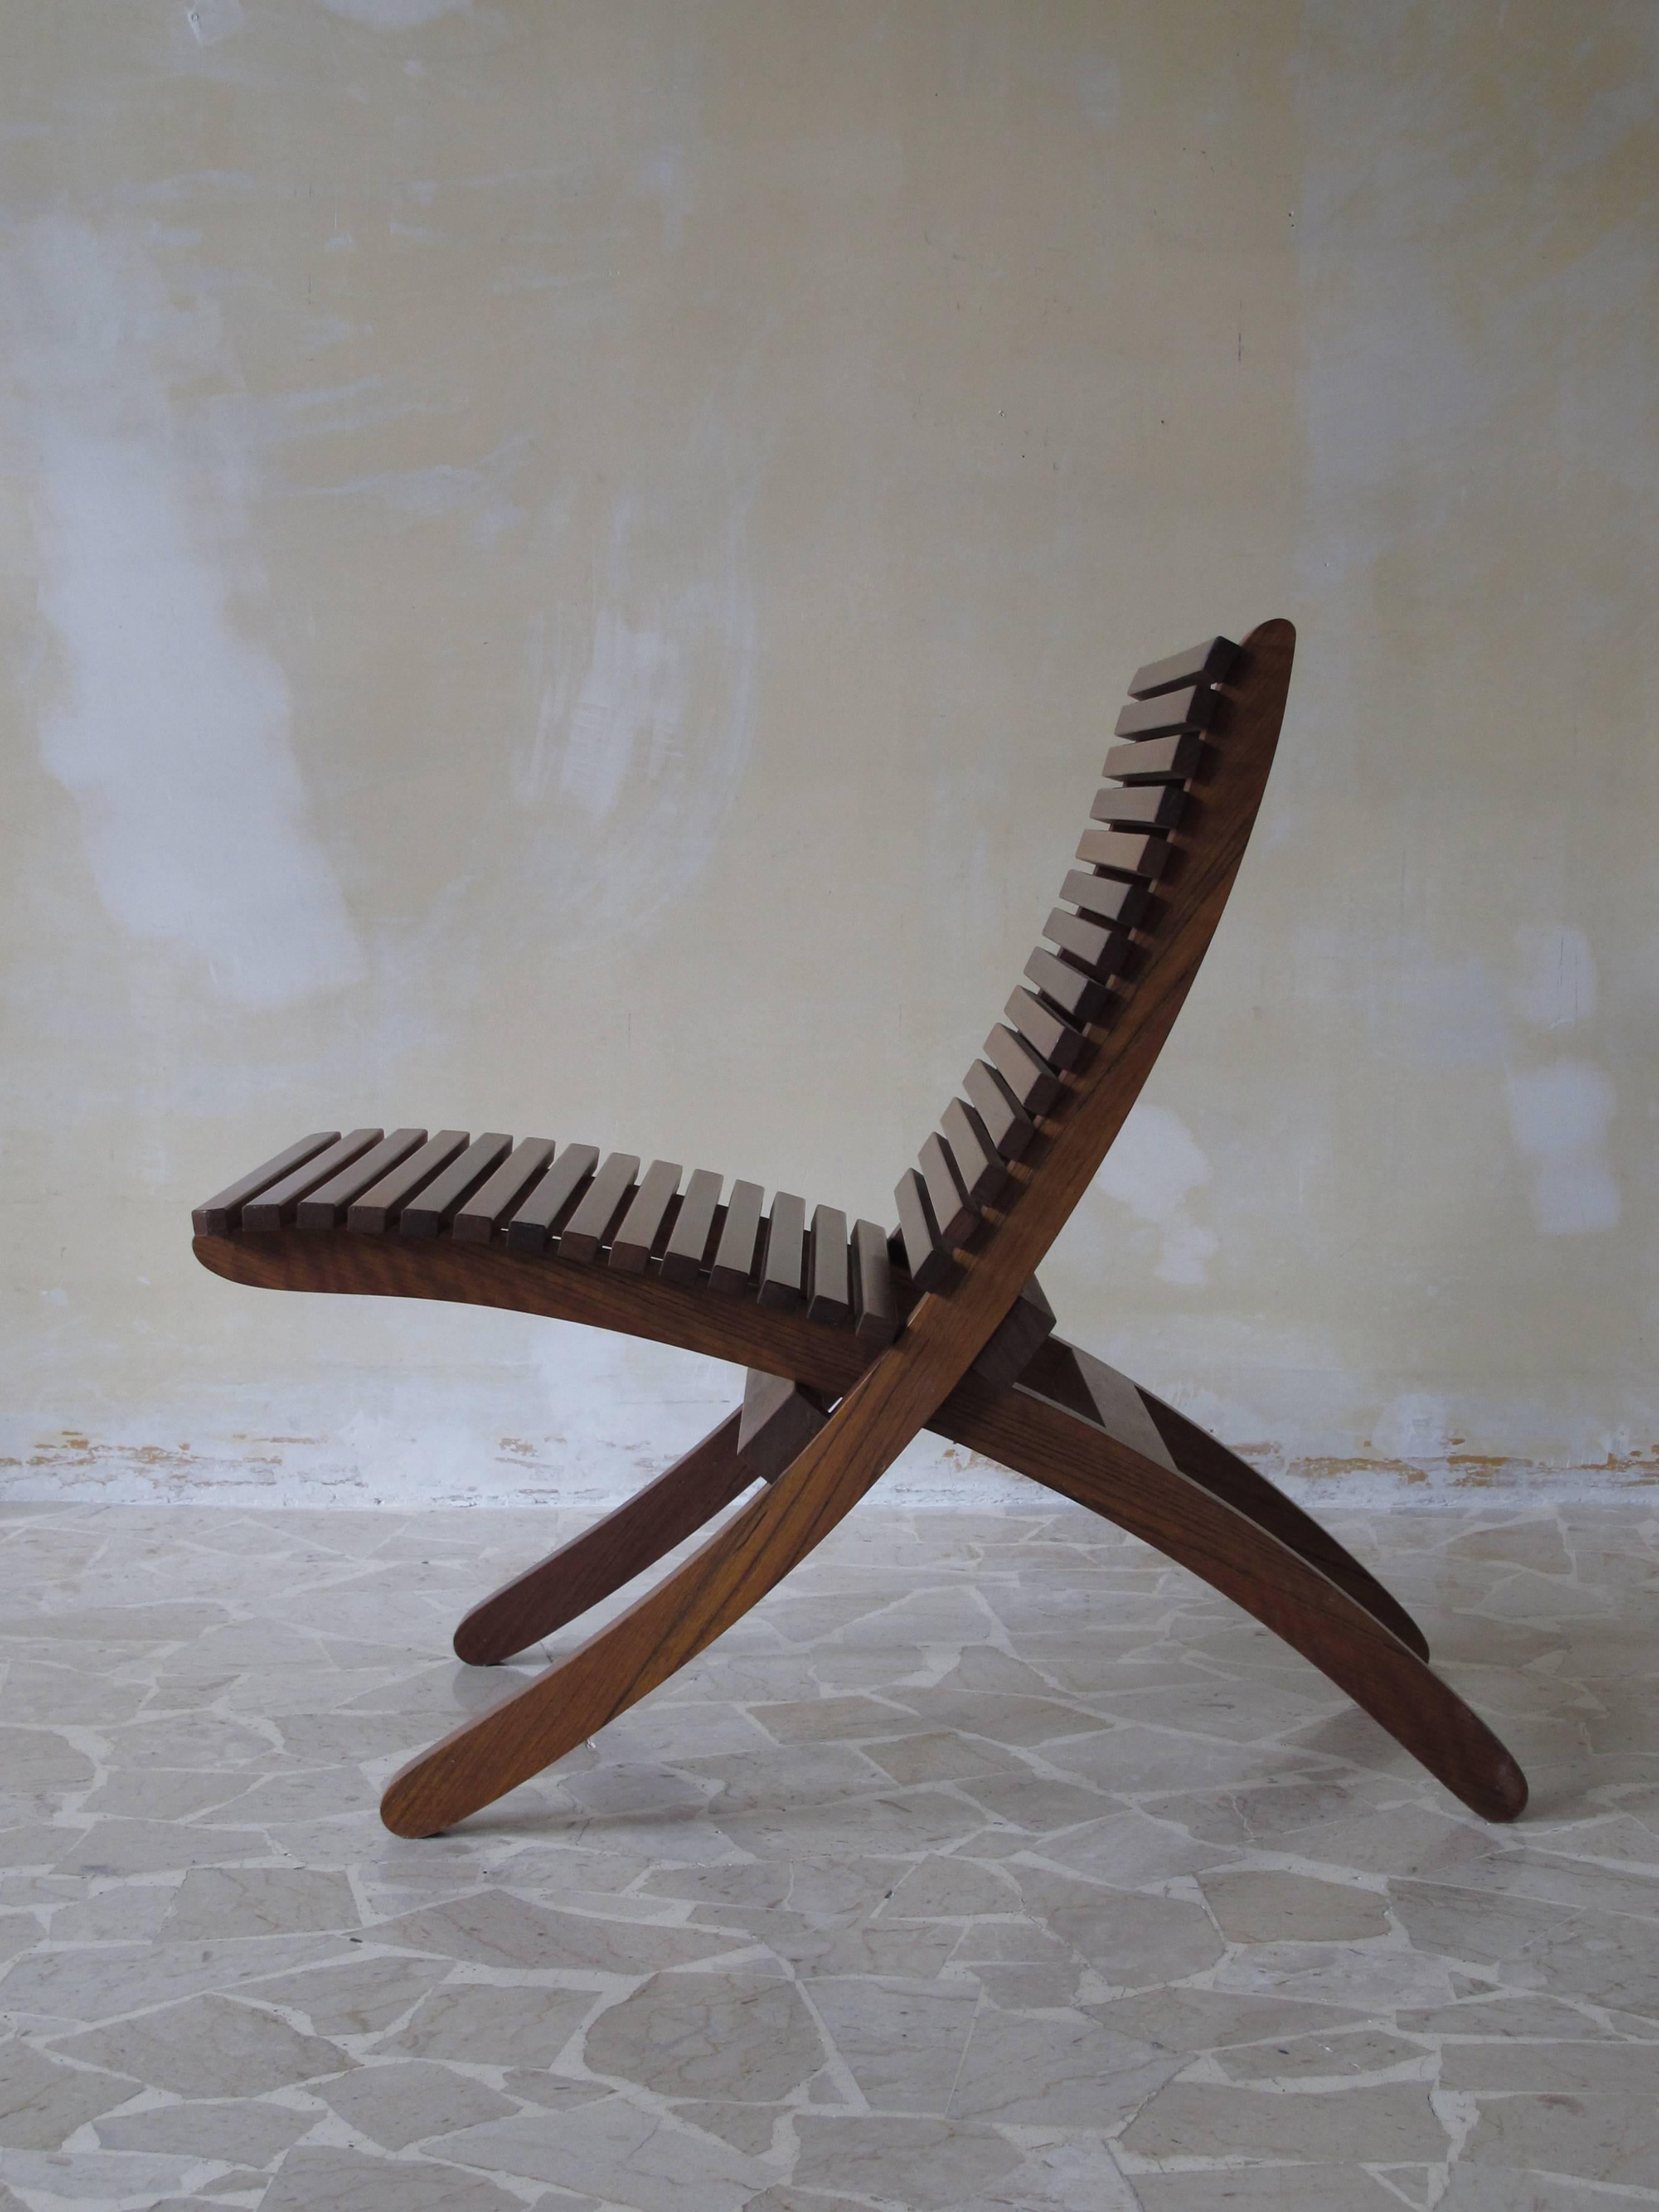 Italian chair or armchair in solid wood designed by Paolo Tilche (attributed),
the chair consists of two separable pieces, the chair is perfect for inside and outside, circa 1960s.